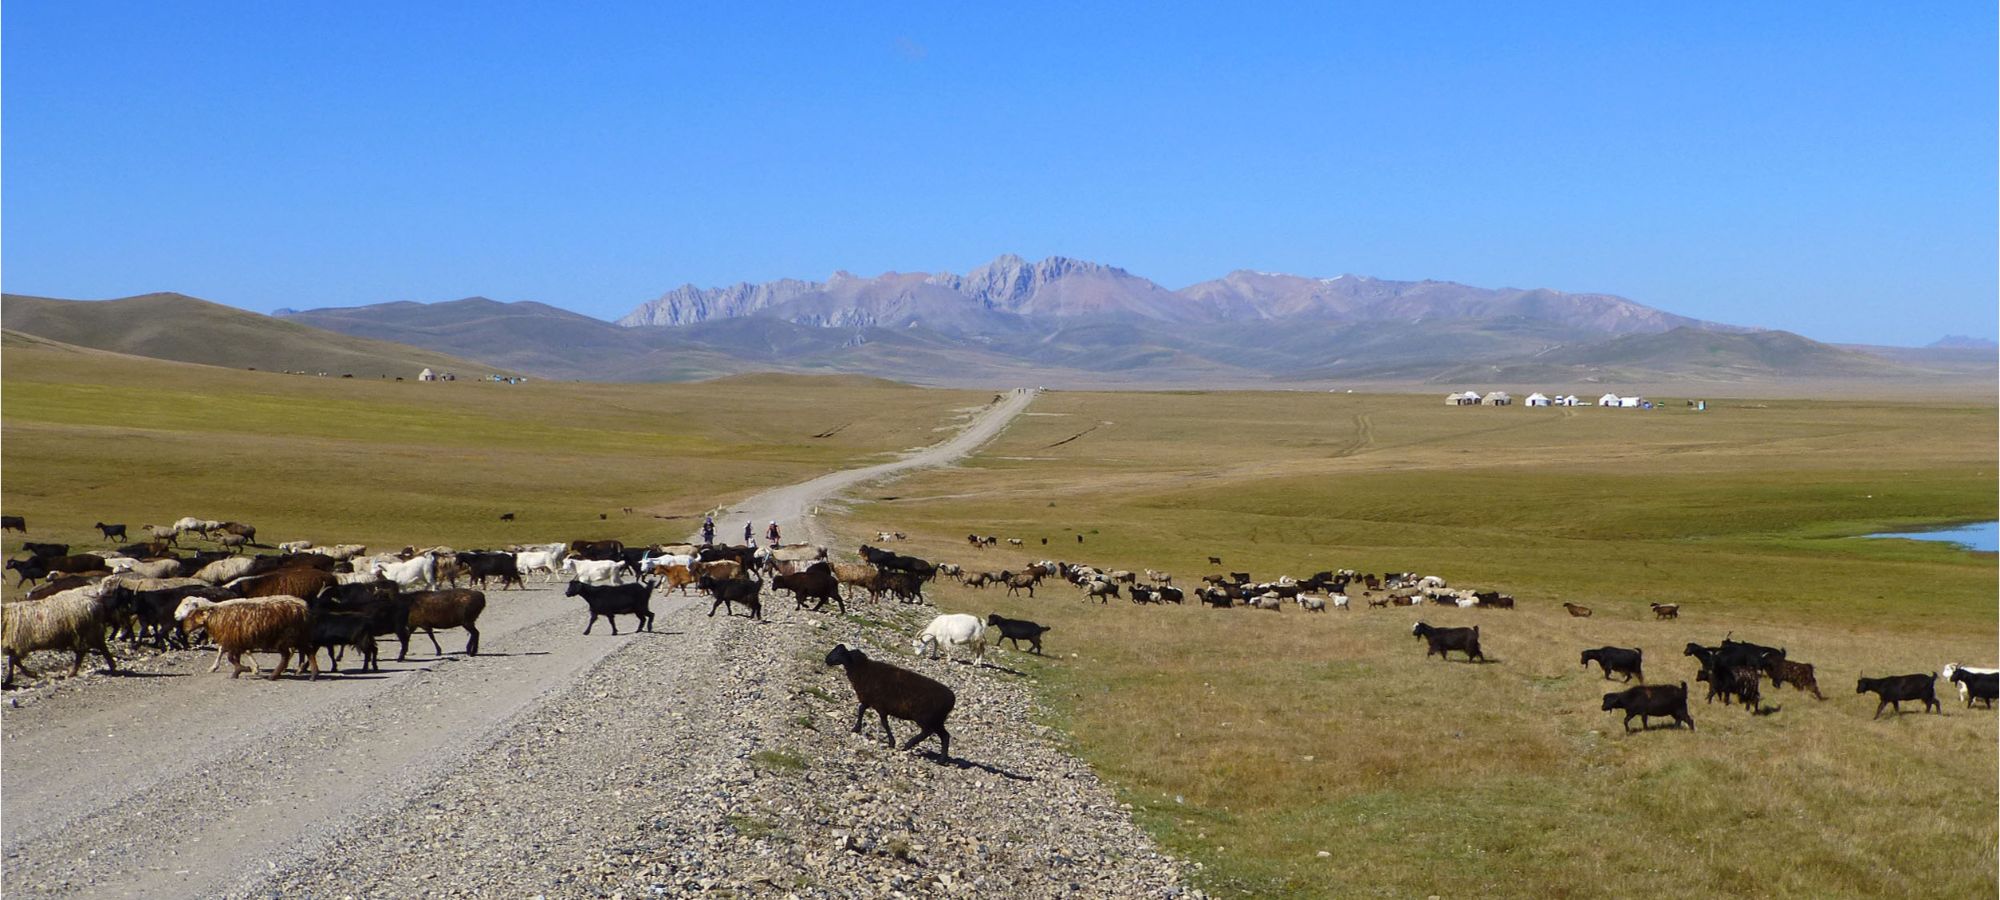 Photos from our Kyrgyzstan - The Shepherd's Way Cycling Holiday